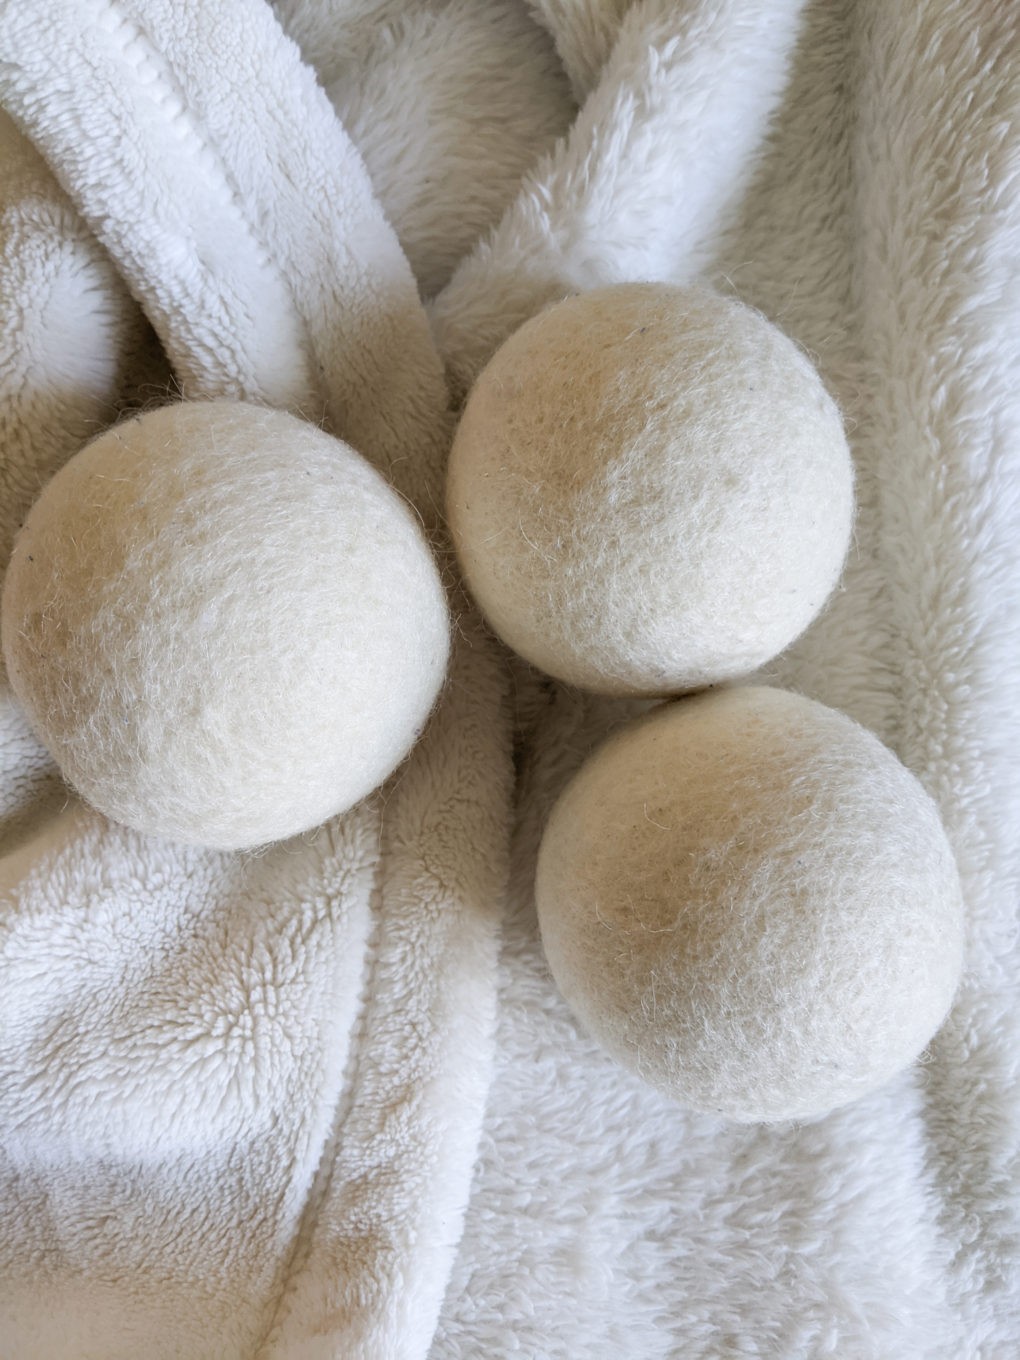 Wool dryer balls -- Environmentally friendly switches to use less single-use plastic bags, plastic wrap, dryer sheets, etc. Reusable ideas and ways to be eco friendly.